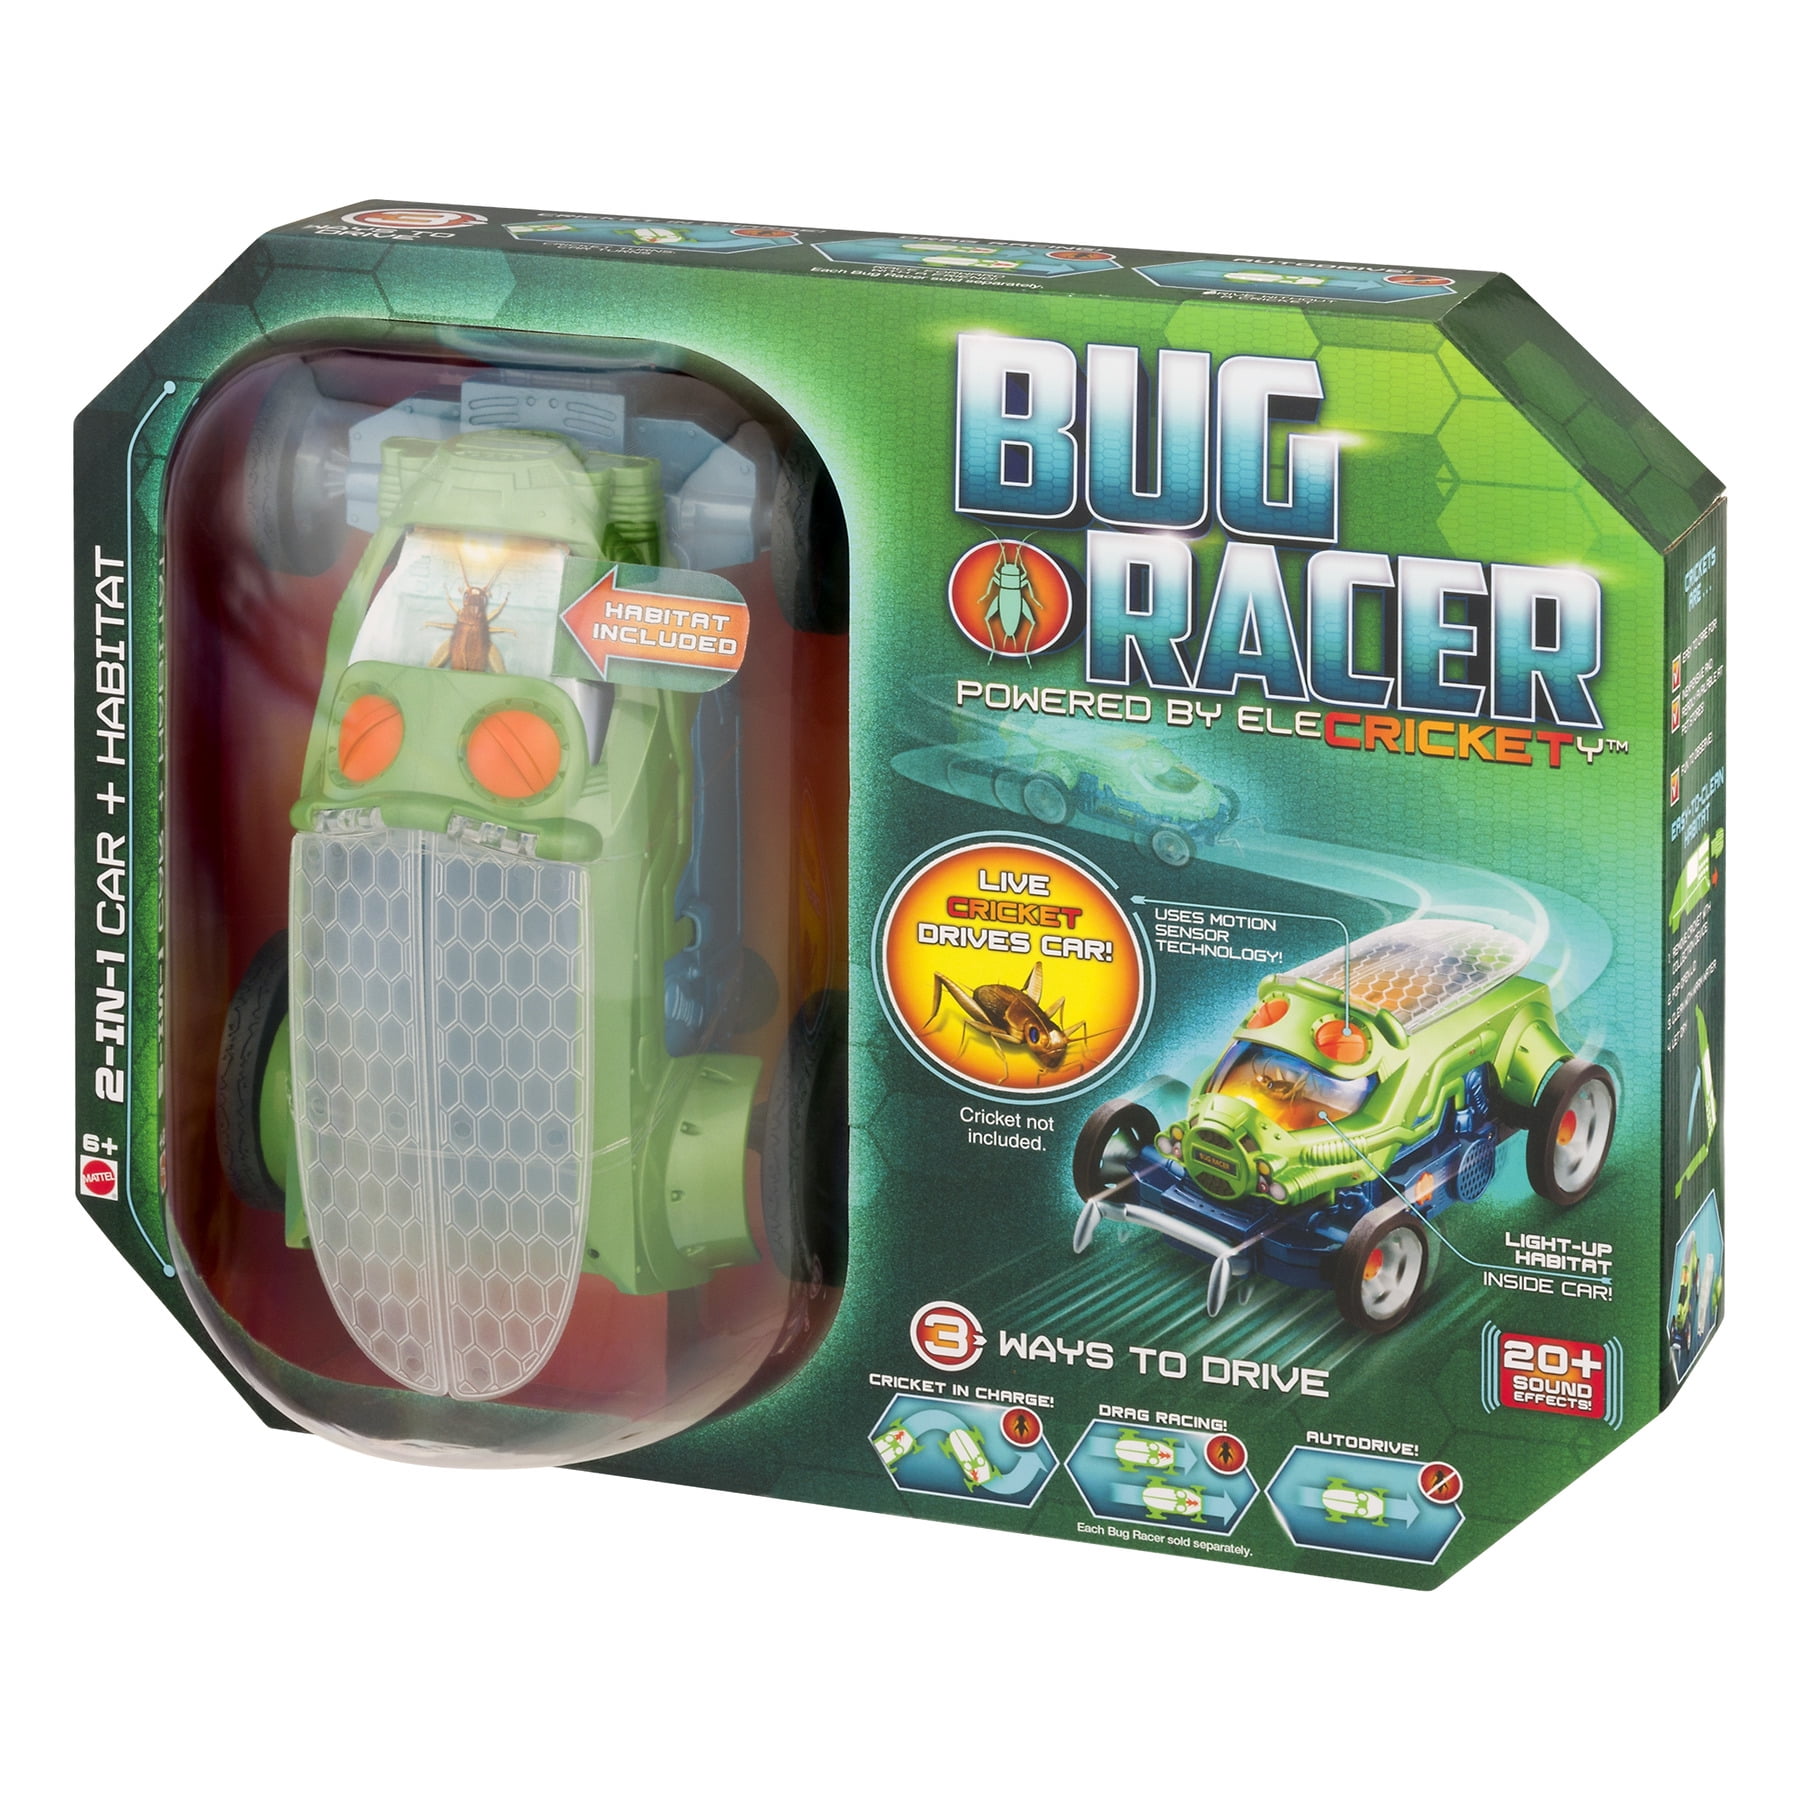 2 Bug Racer Powered by Elecrickety Vehicle Cricket Car Toy Stem Mattel for sale online 